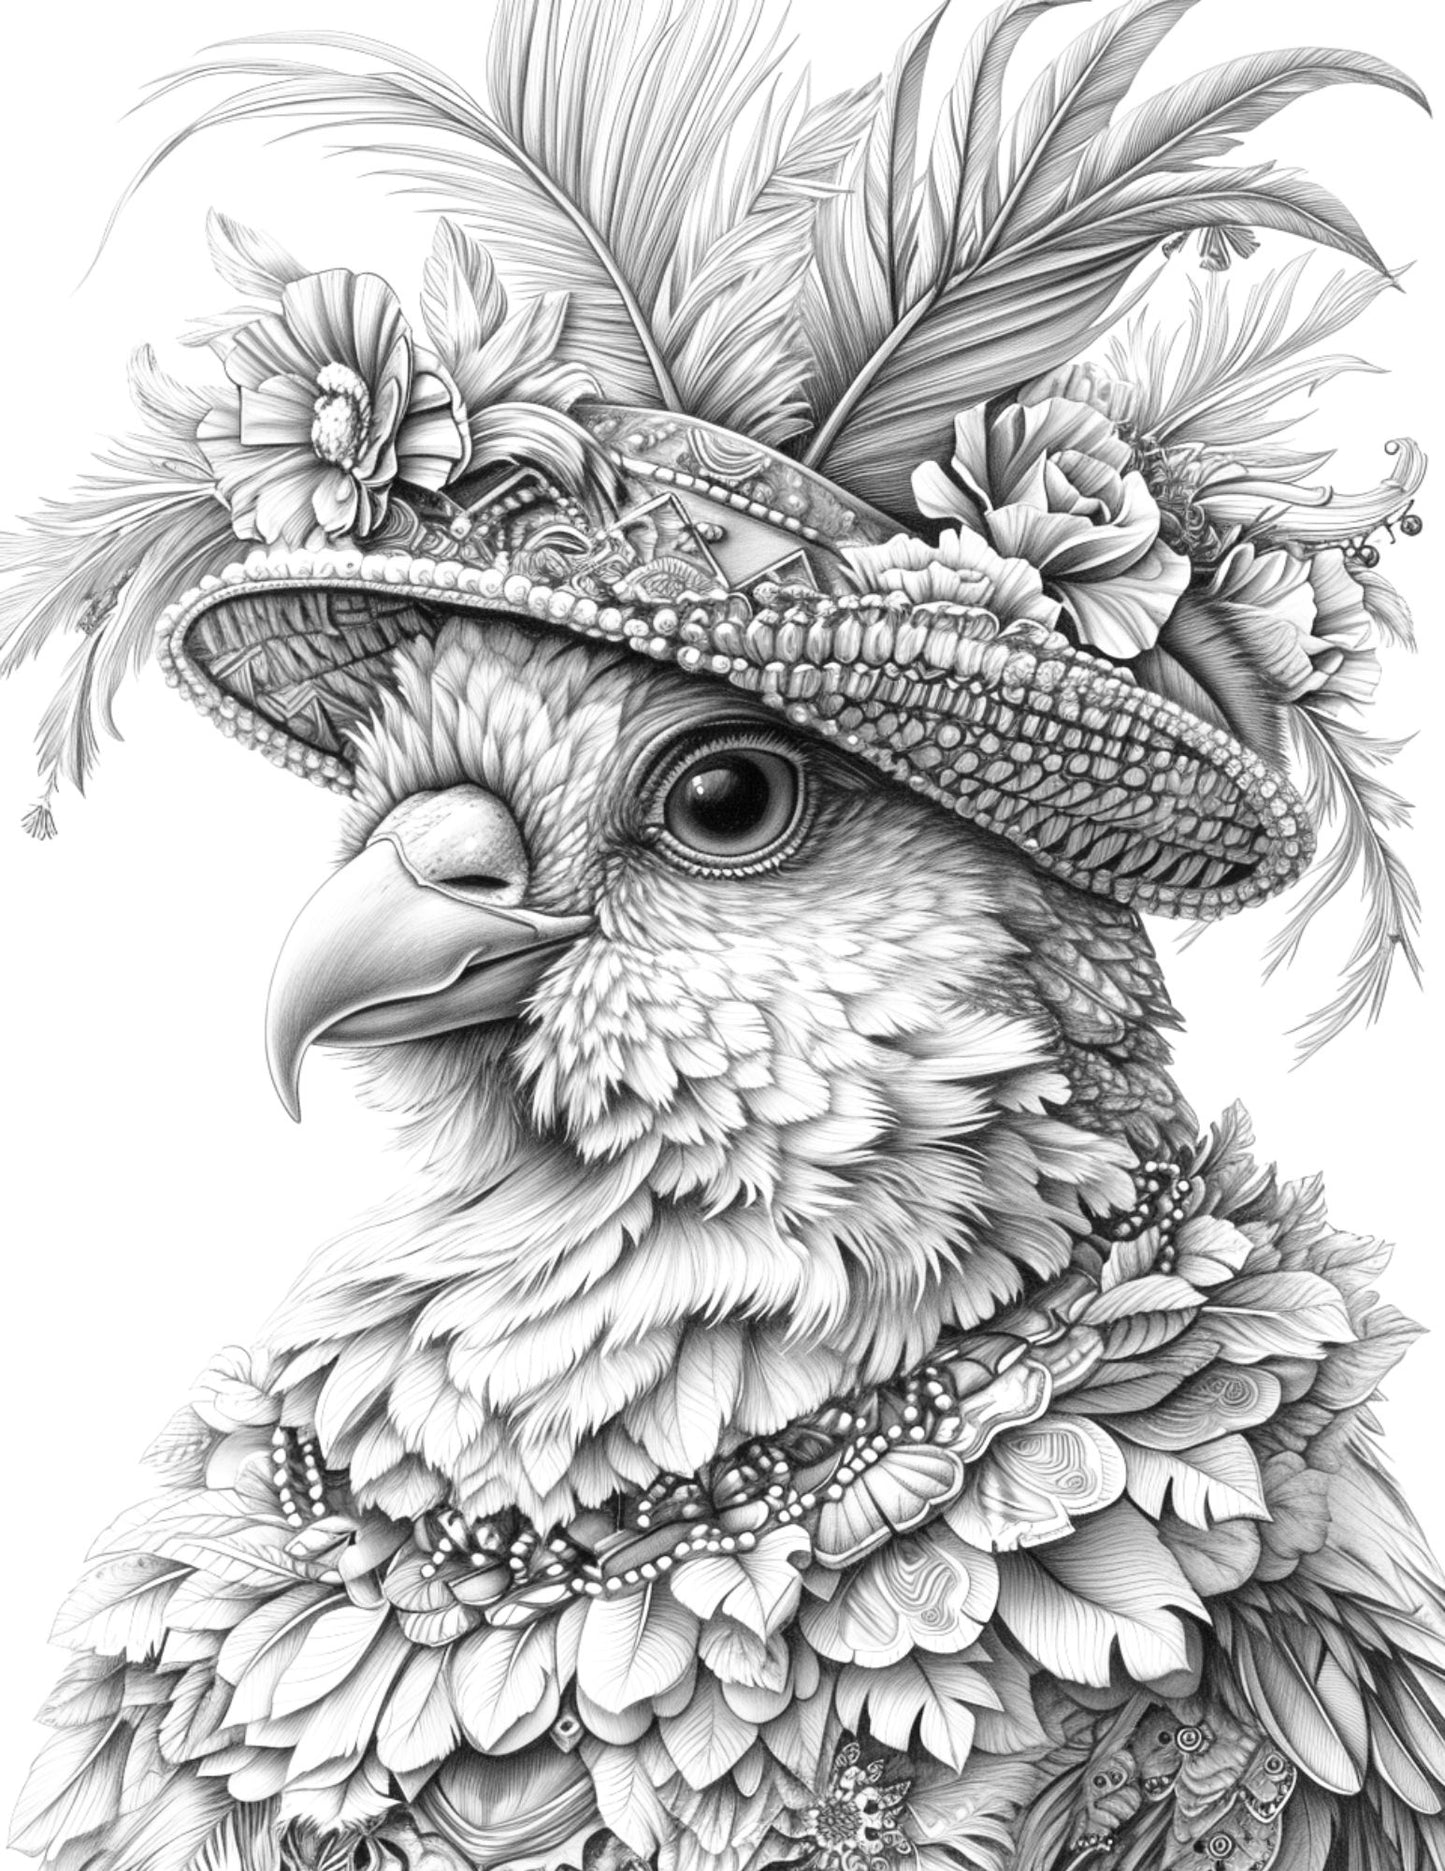 adult coloring pages, adult coloring sheets, adult coloring book pdf, adult coloring book printable, grayscale coloring pages, grayscale coloring books, spring coloring pages for adults, spring coloring book, grayscale illustration, free adult coloring pages